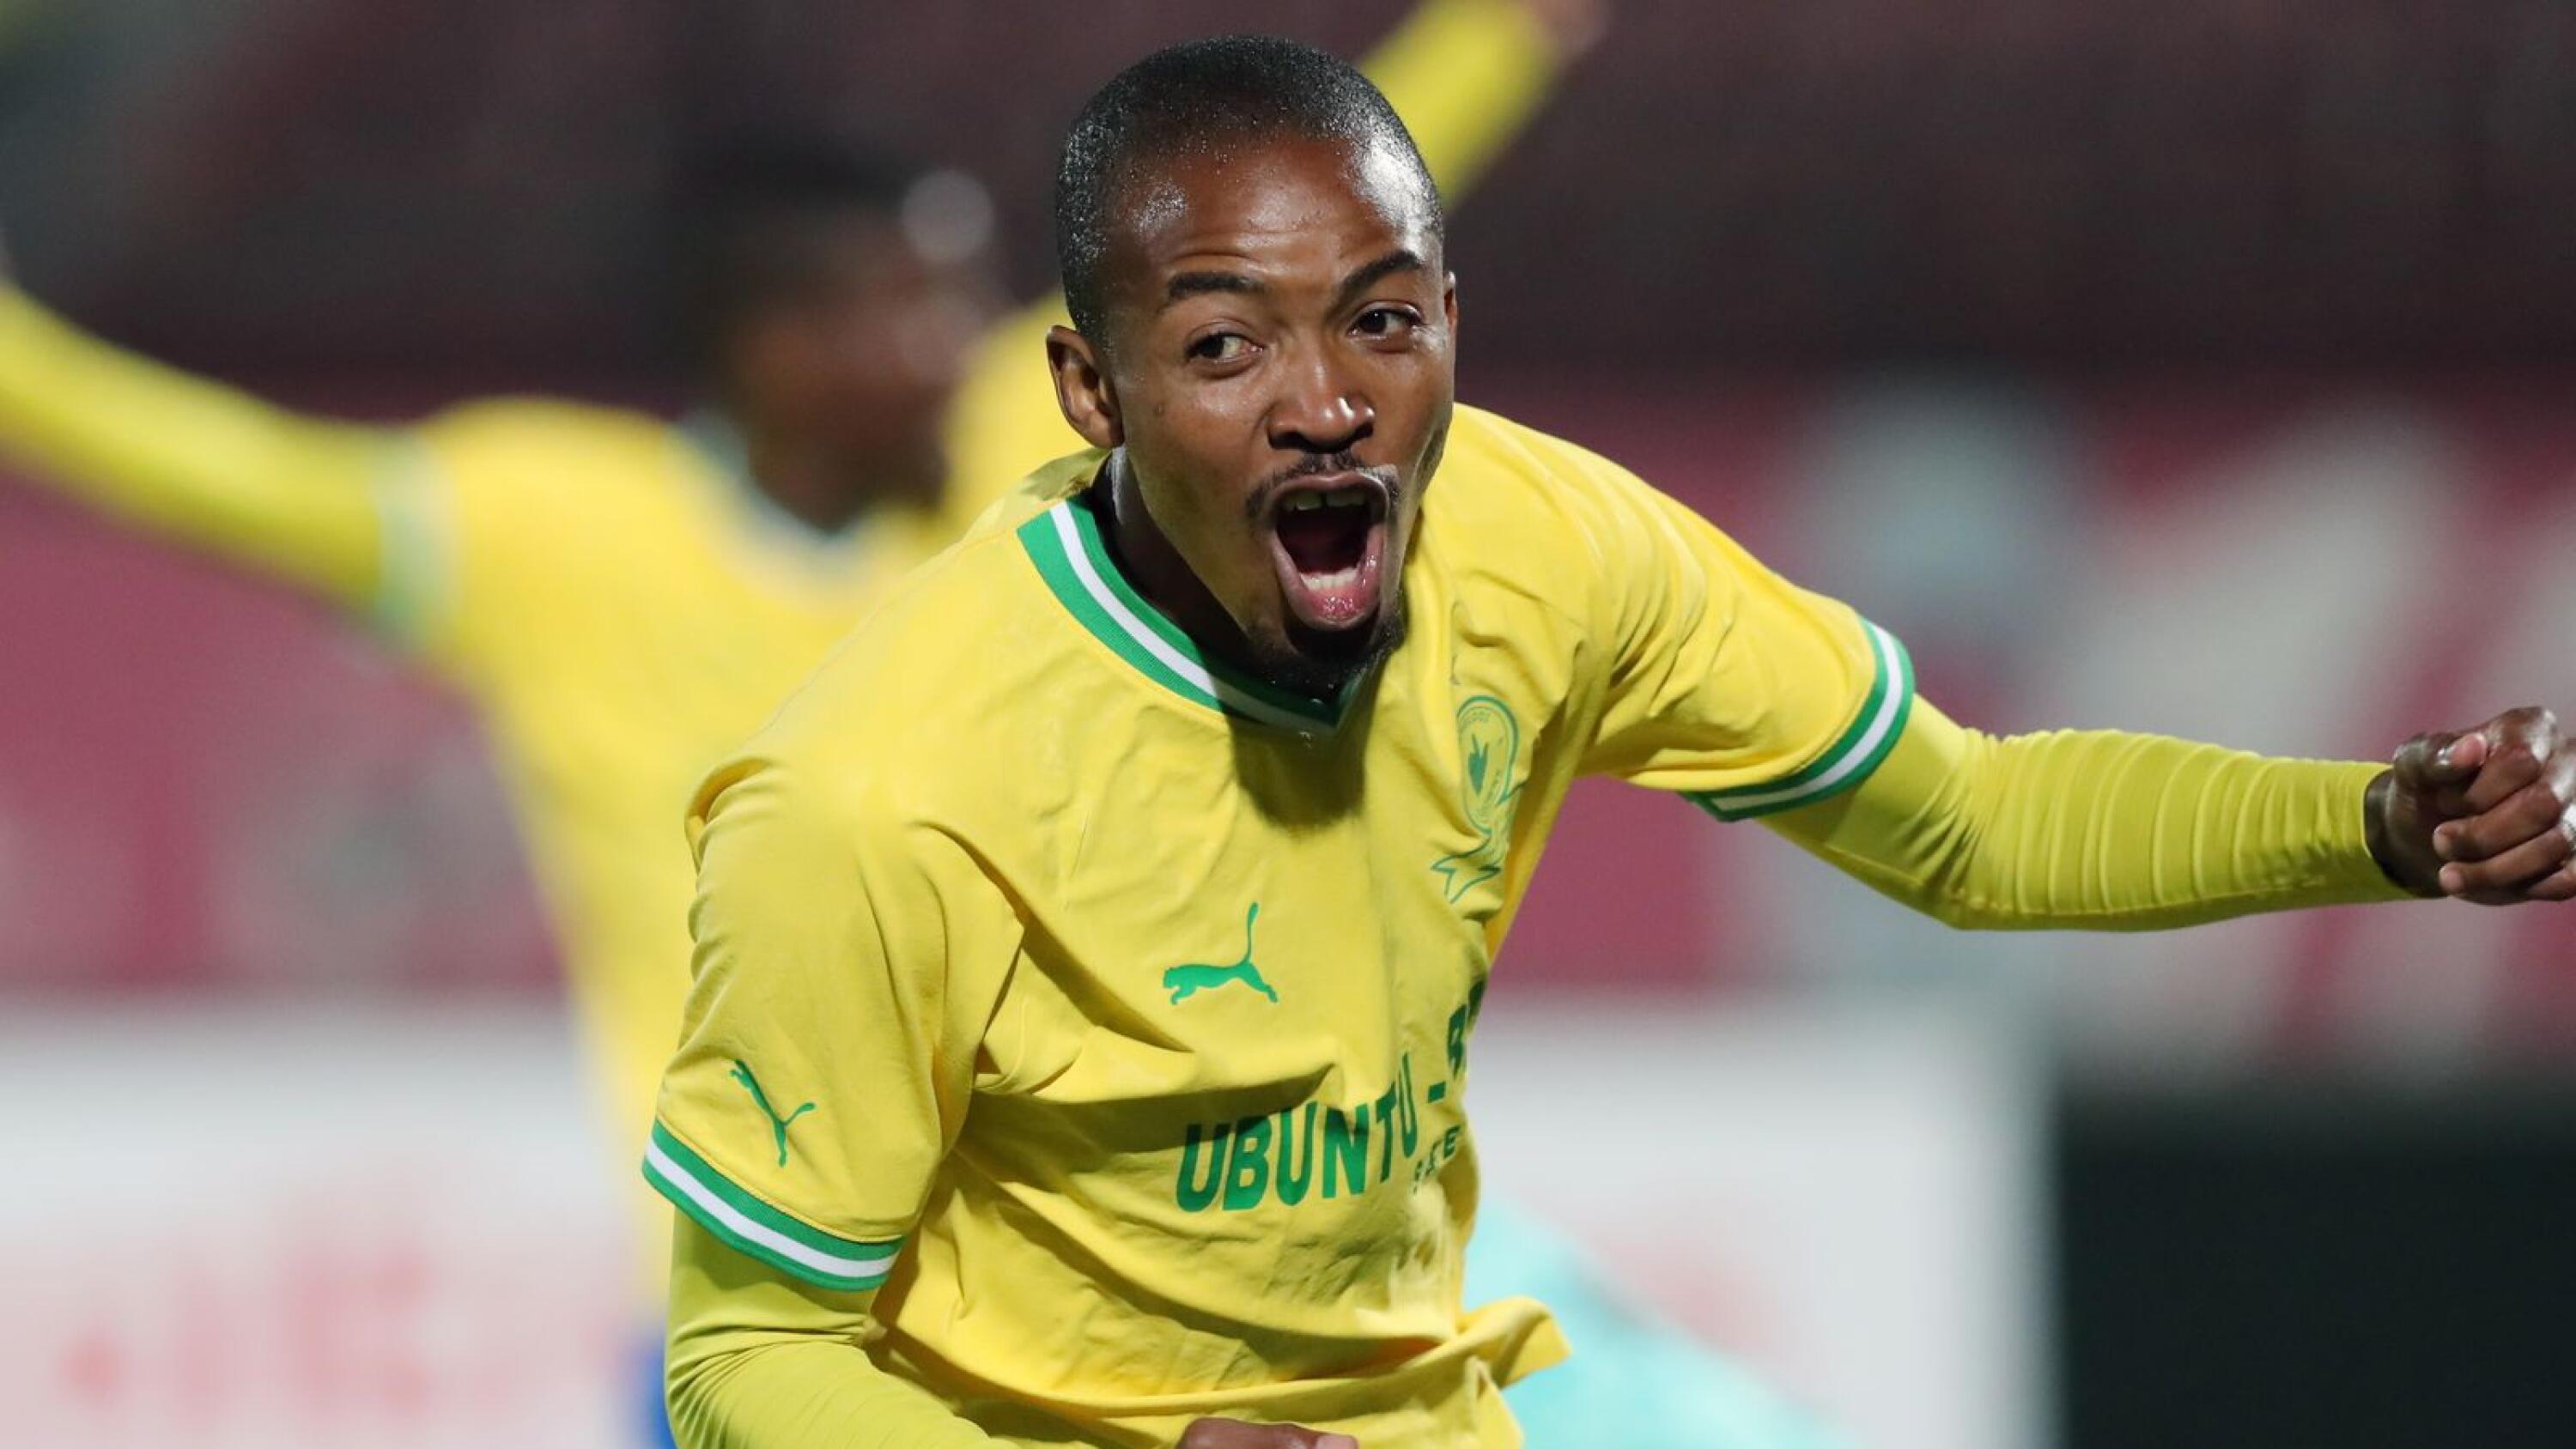 Mamelodi Sundowns’ Thapelo Morena celebrates after scoring during their CAF Champions League match against Al Ahly in Cairo